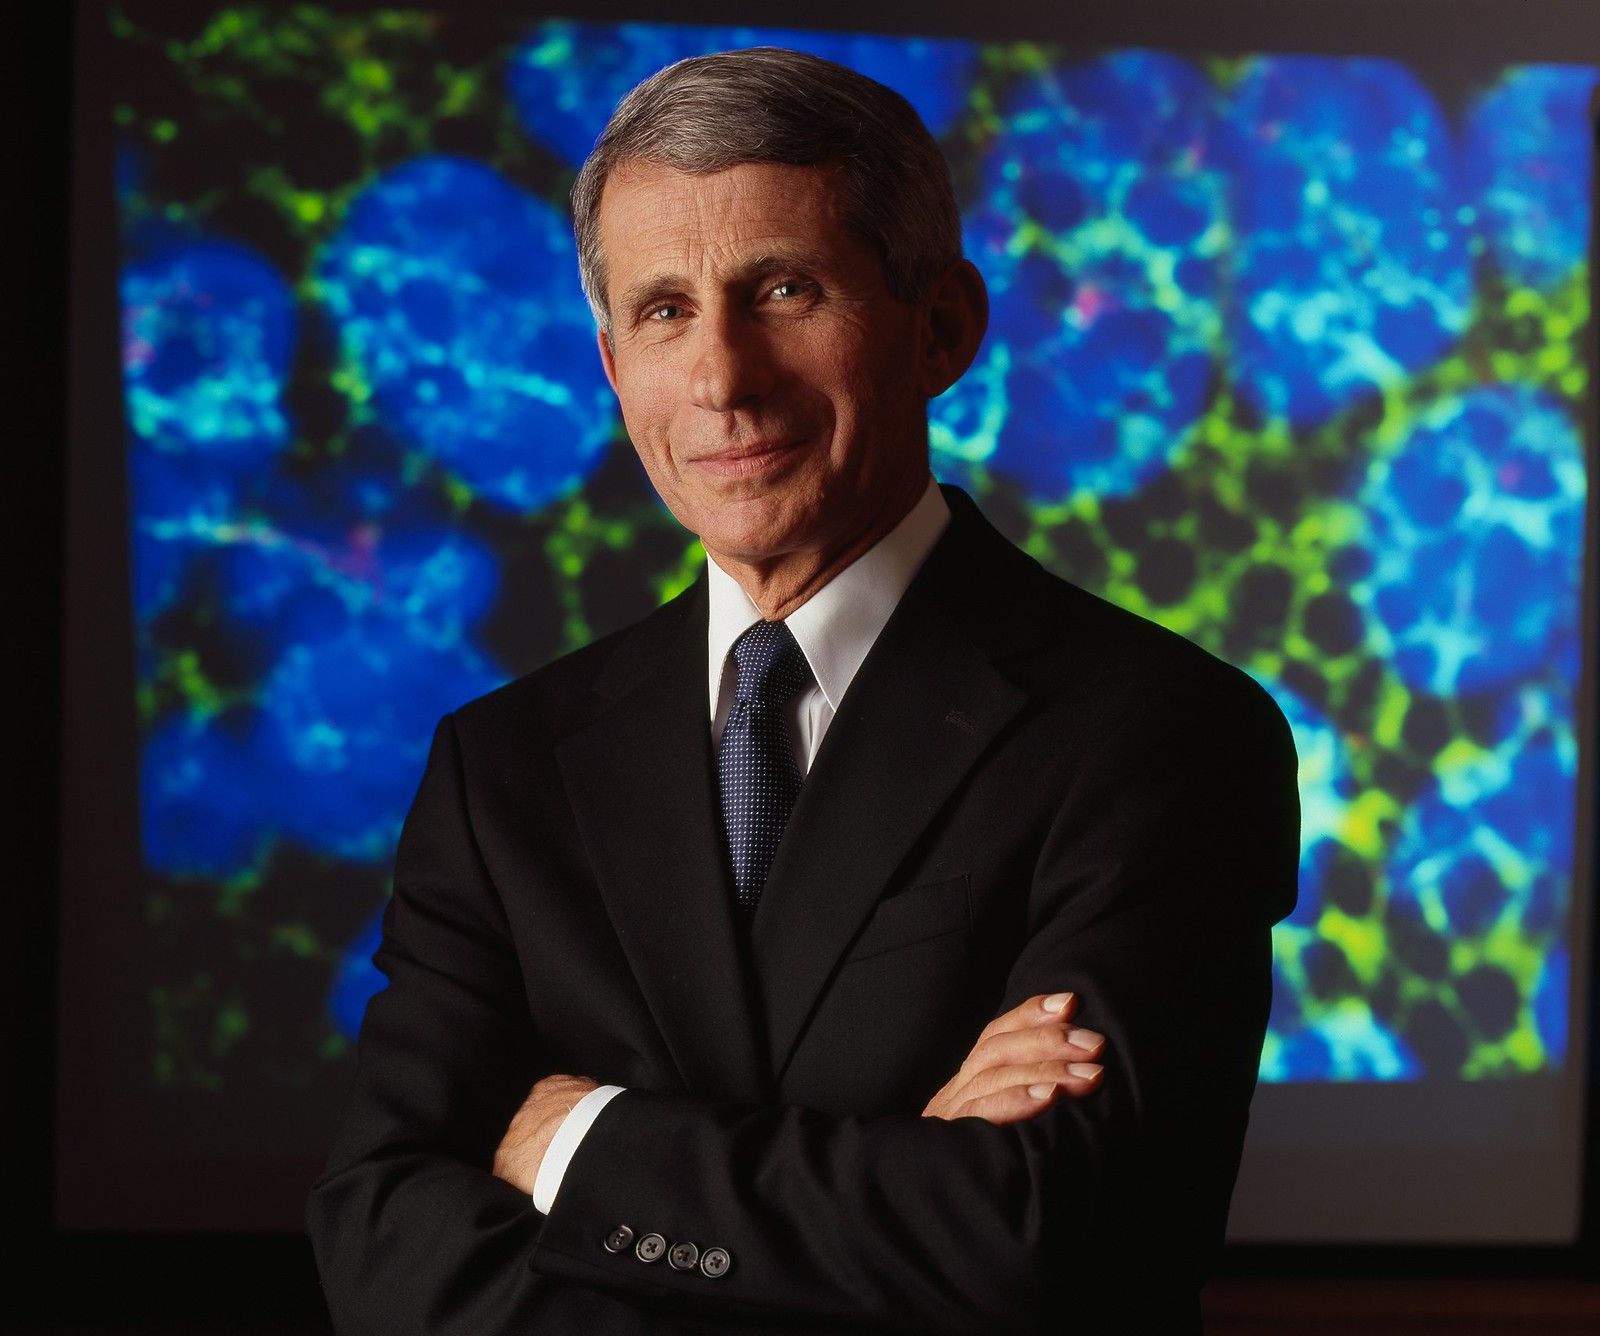 Anthony Fauci, director of the National Institute for Allergy and Infectious Diseases (photo courtesy of NIAID)